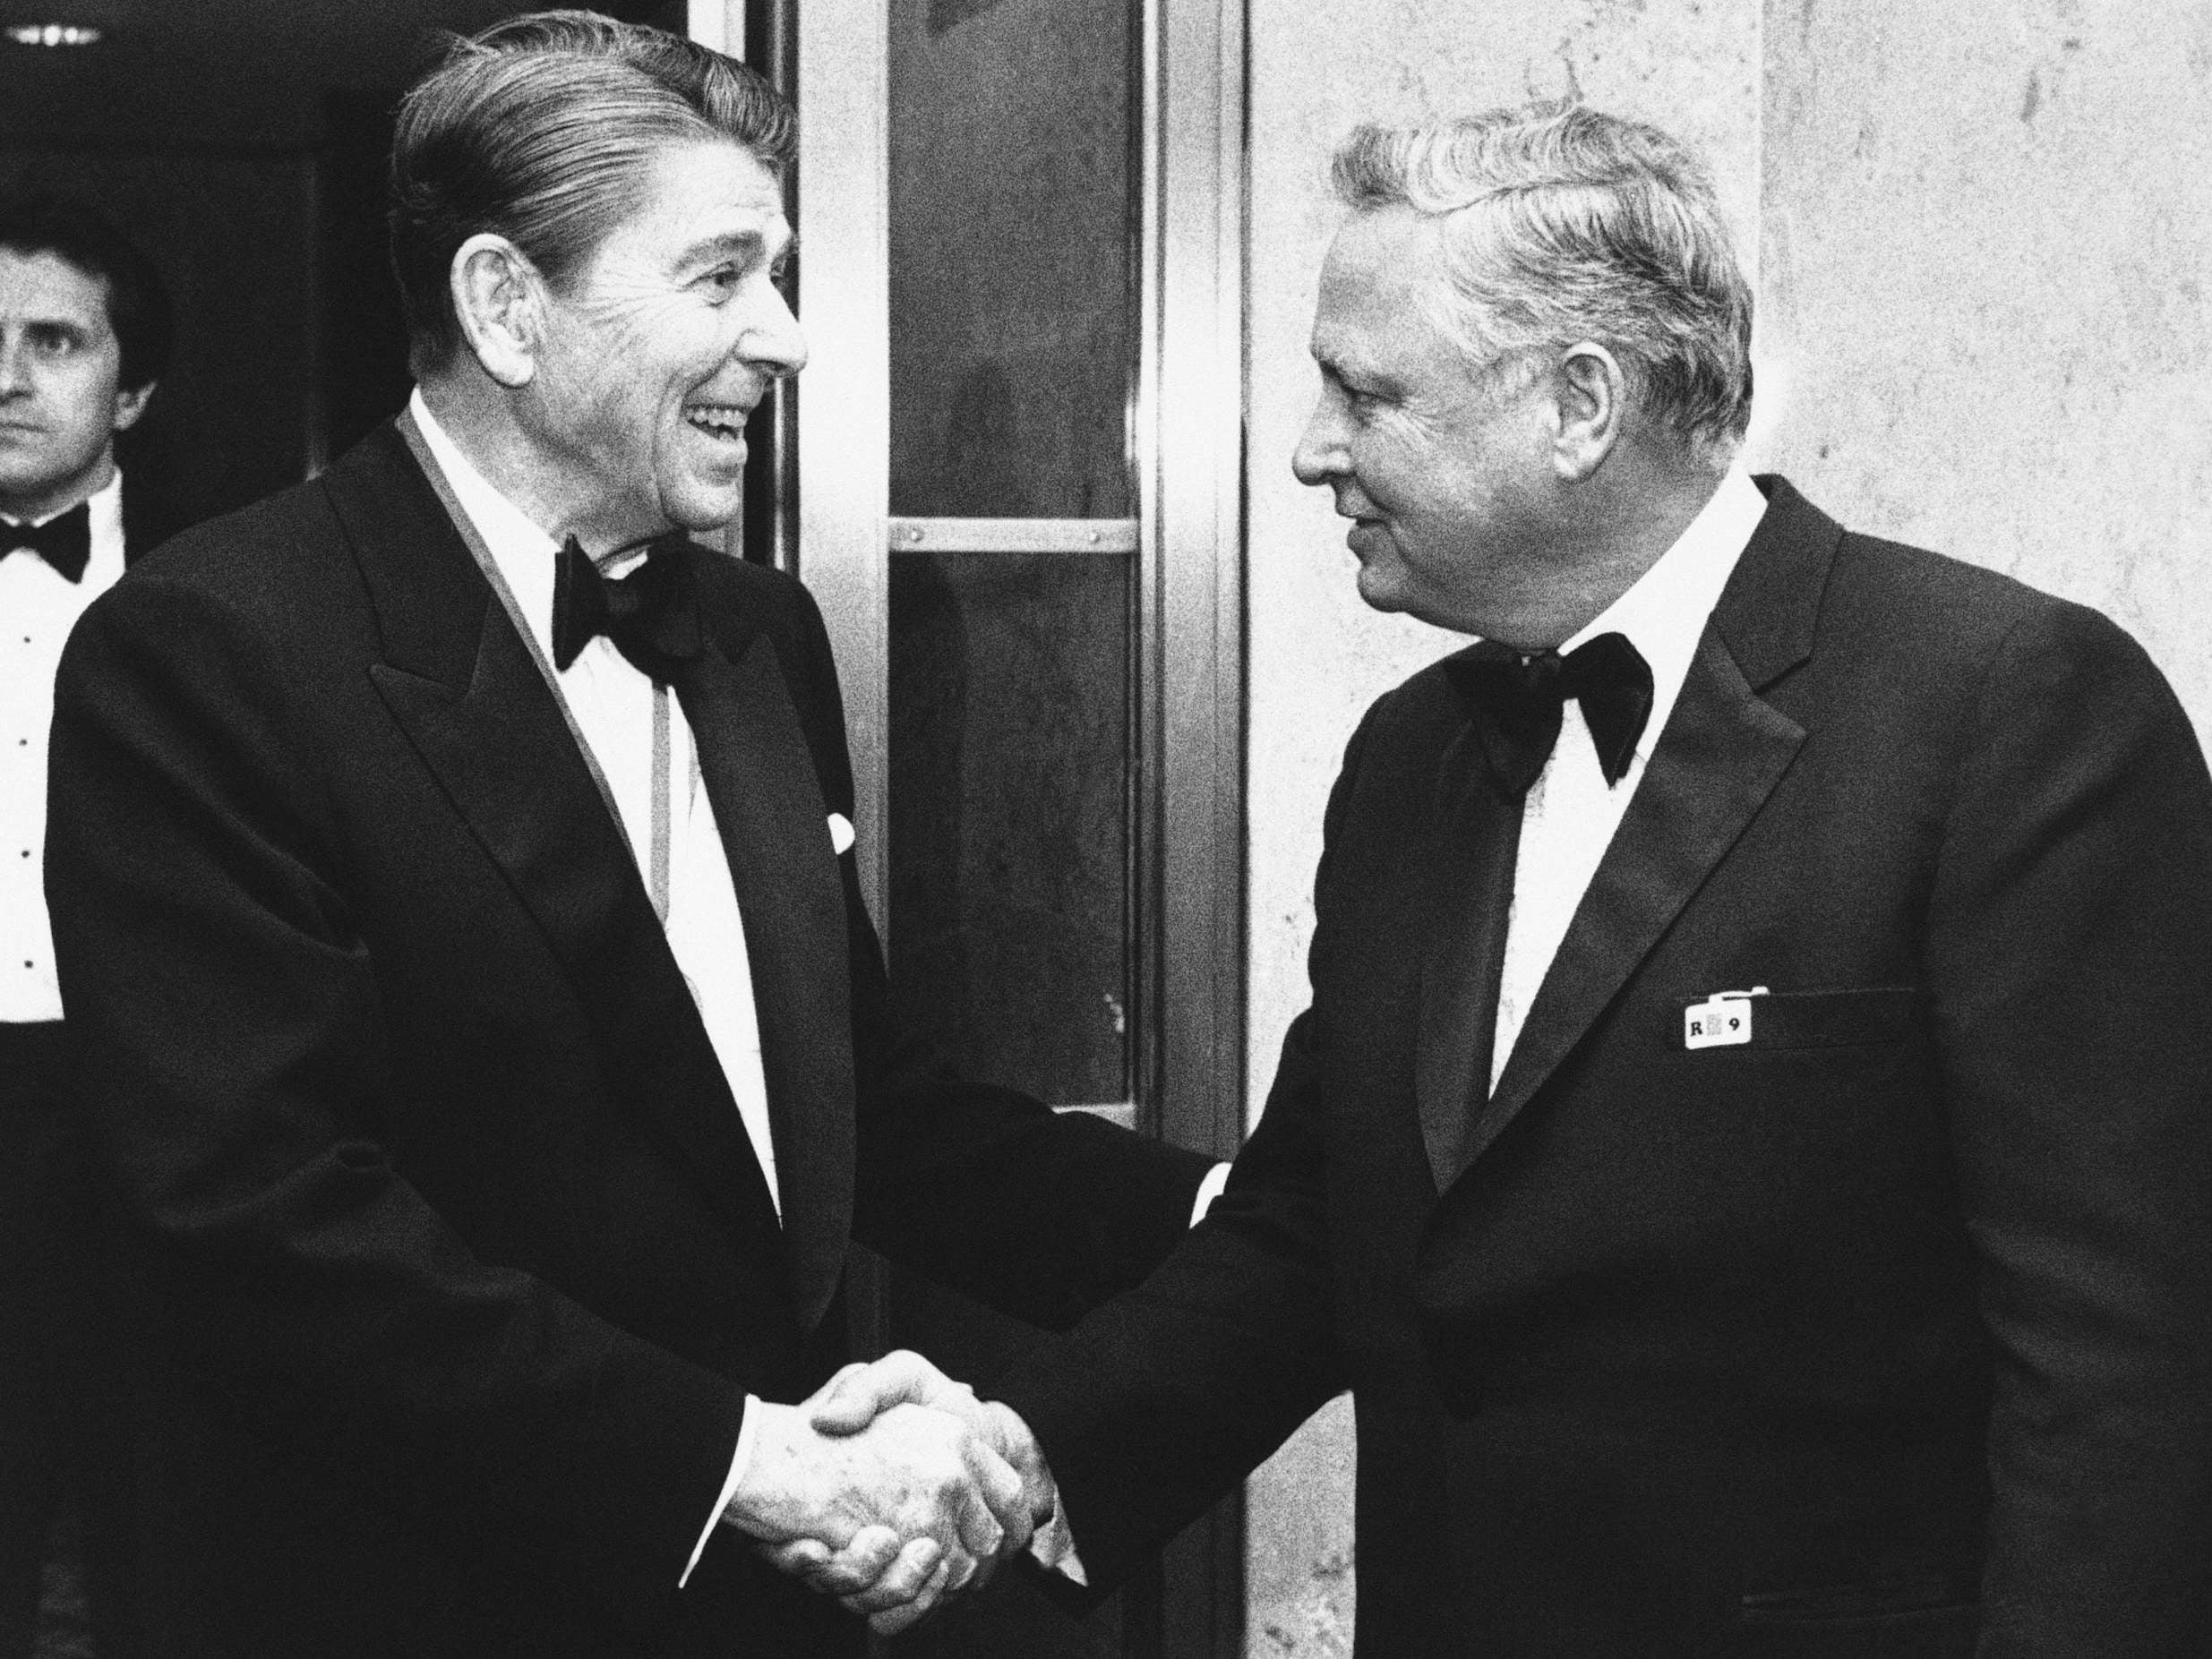 Ronald Reagan (left) shakes hands with Hilton upon his arrival at Capitol Hill in 1985